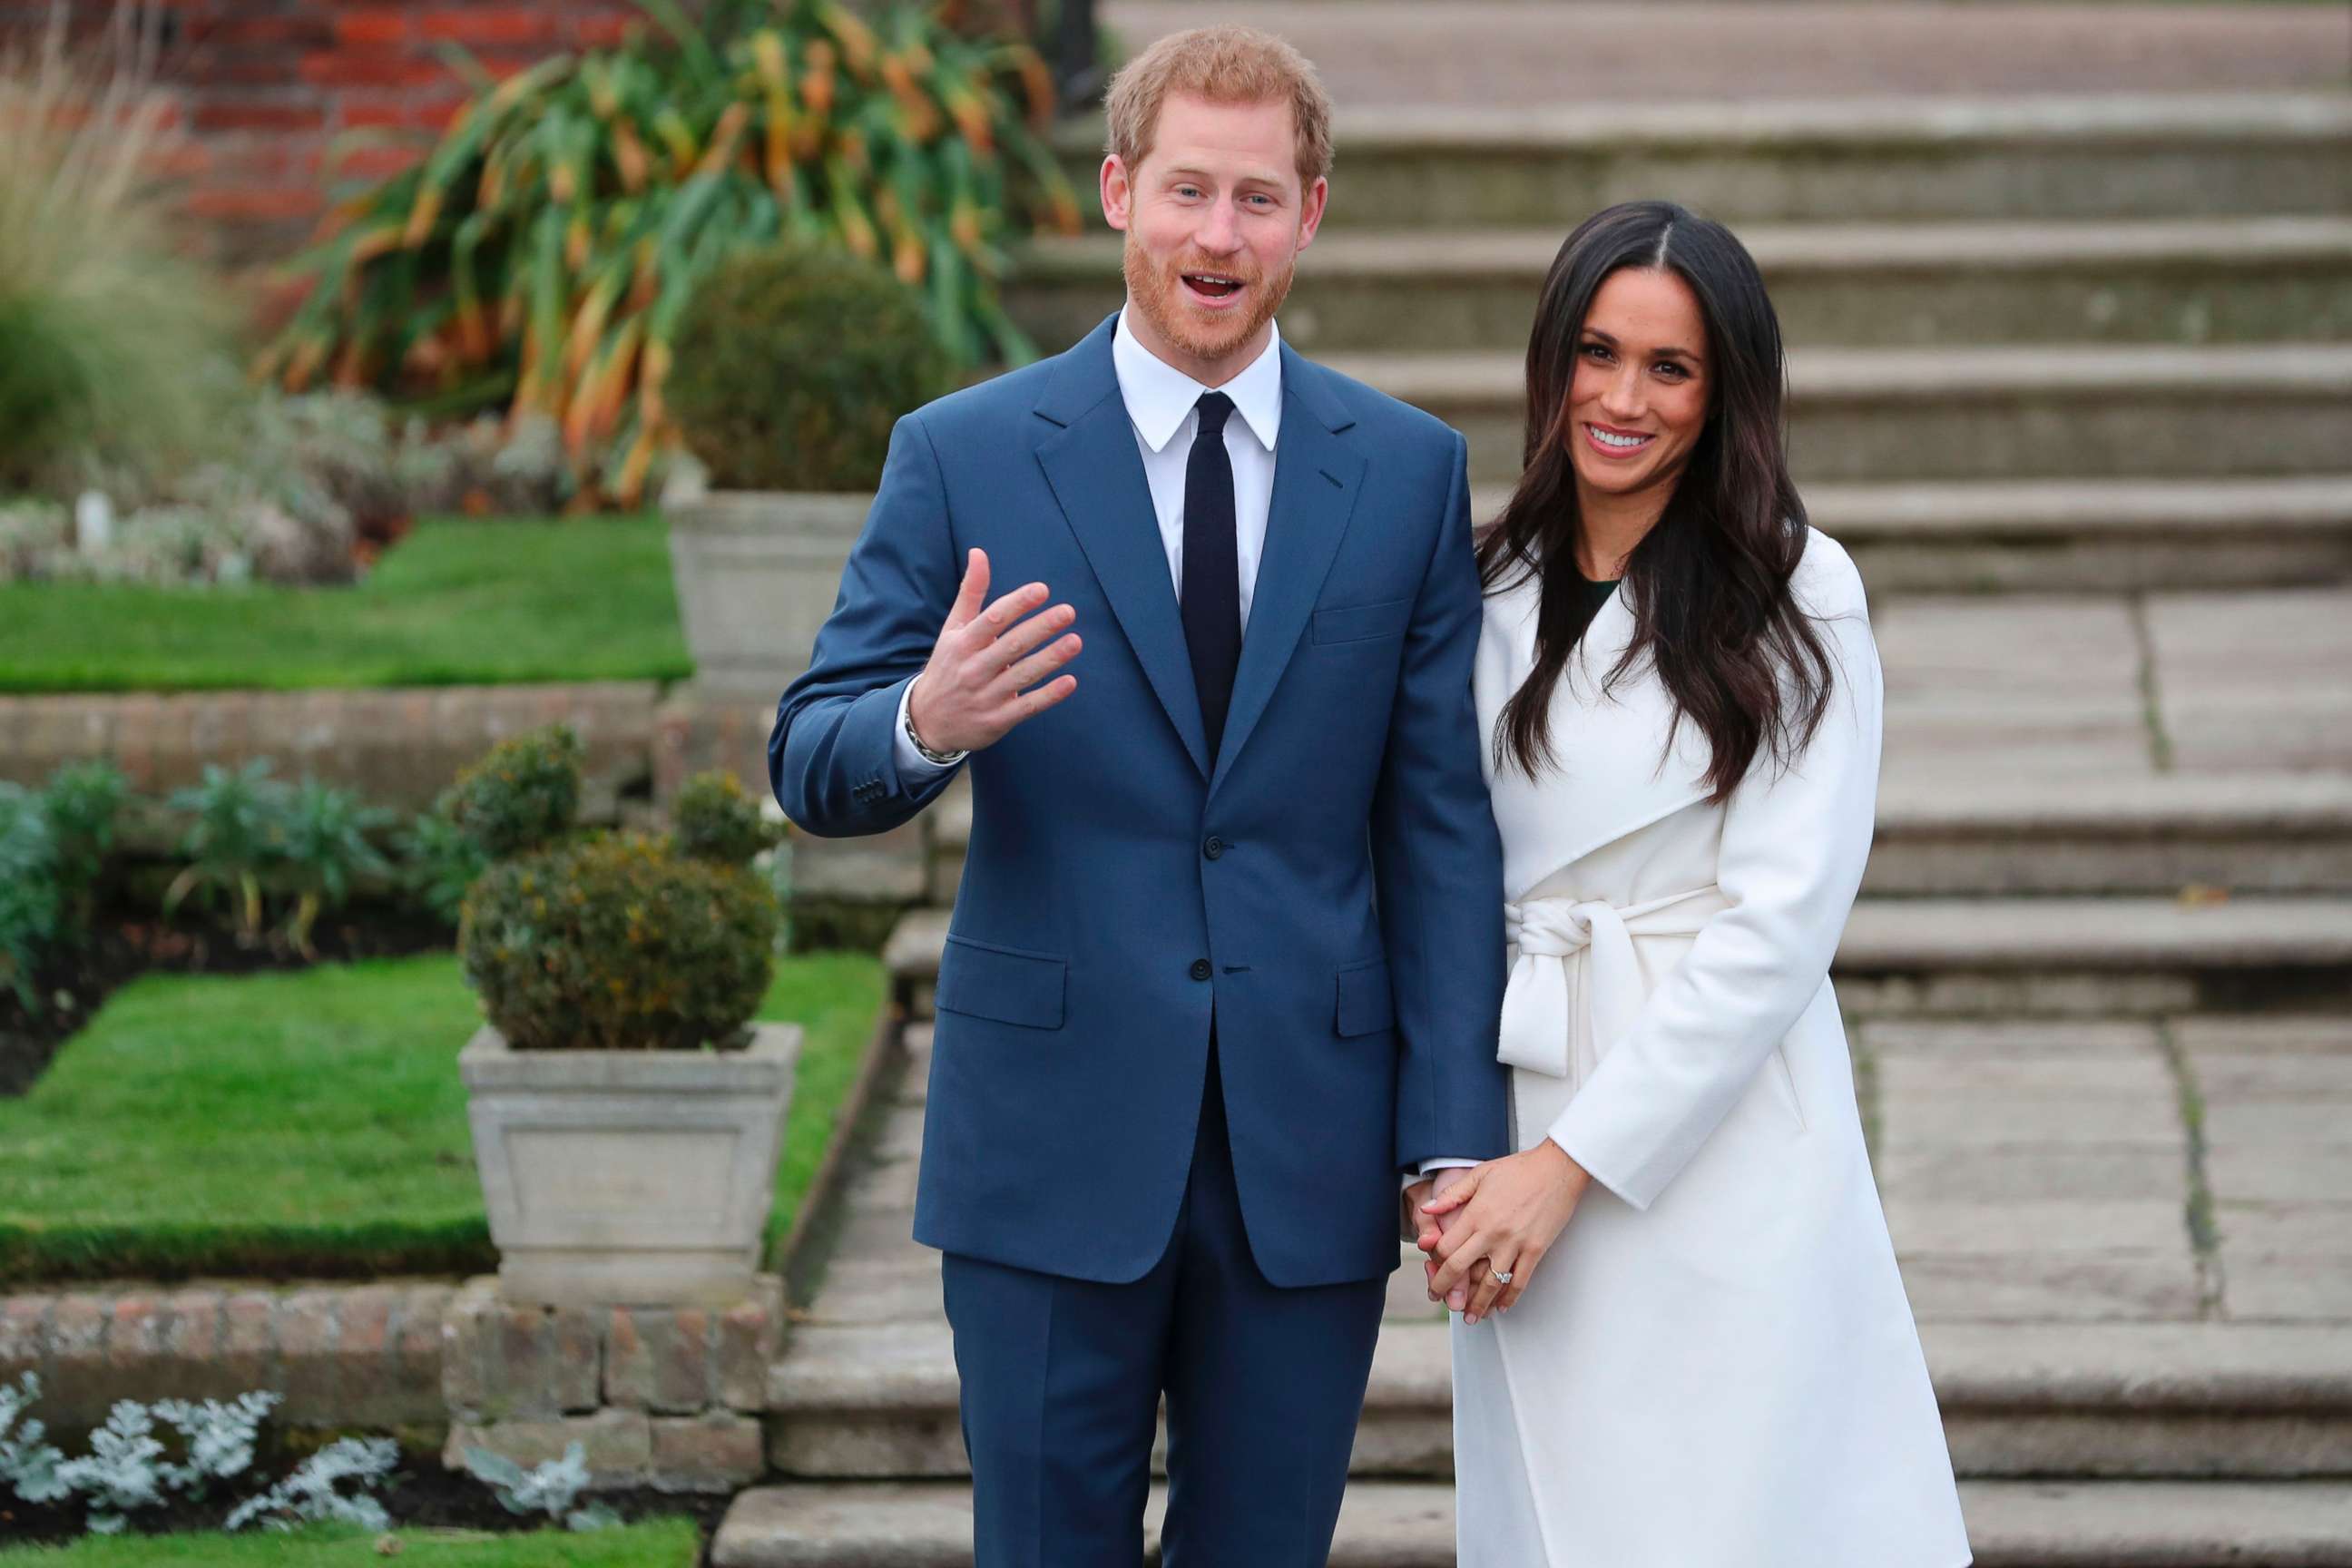 PHOTO: Britain's Prince Harry and his fiance U.S. actress Meghan Markle pose for a photograph in the Sunken Garden at Kensington Palace in west London, Nov. 27, 2017, following the announcement of their engagement.

